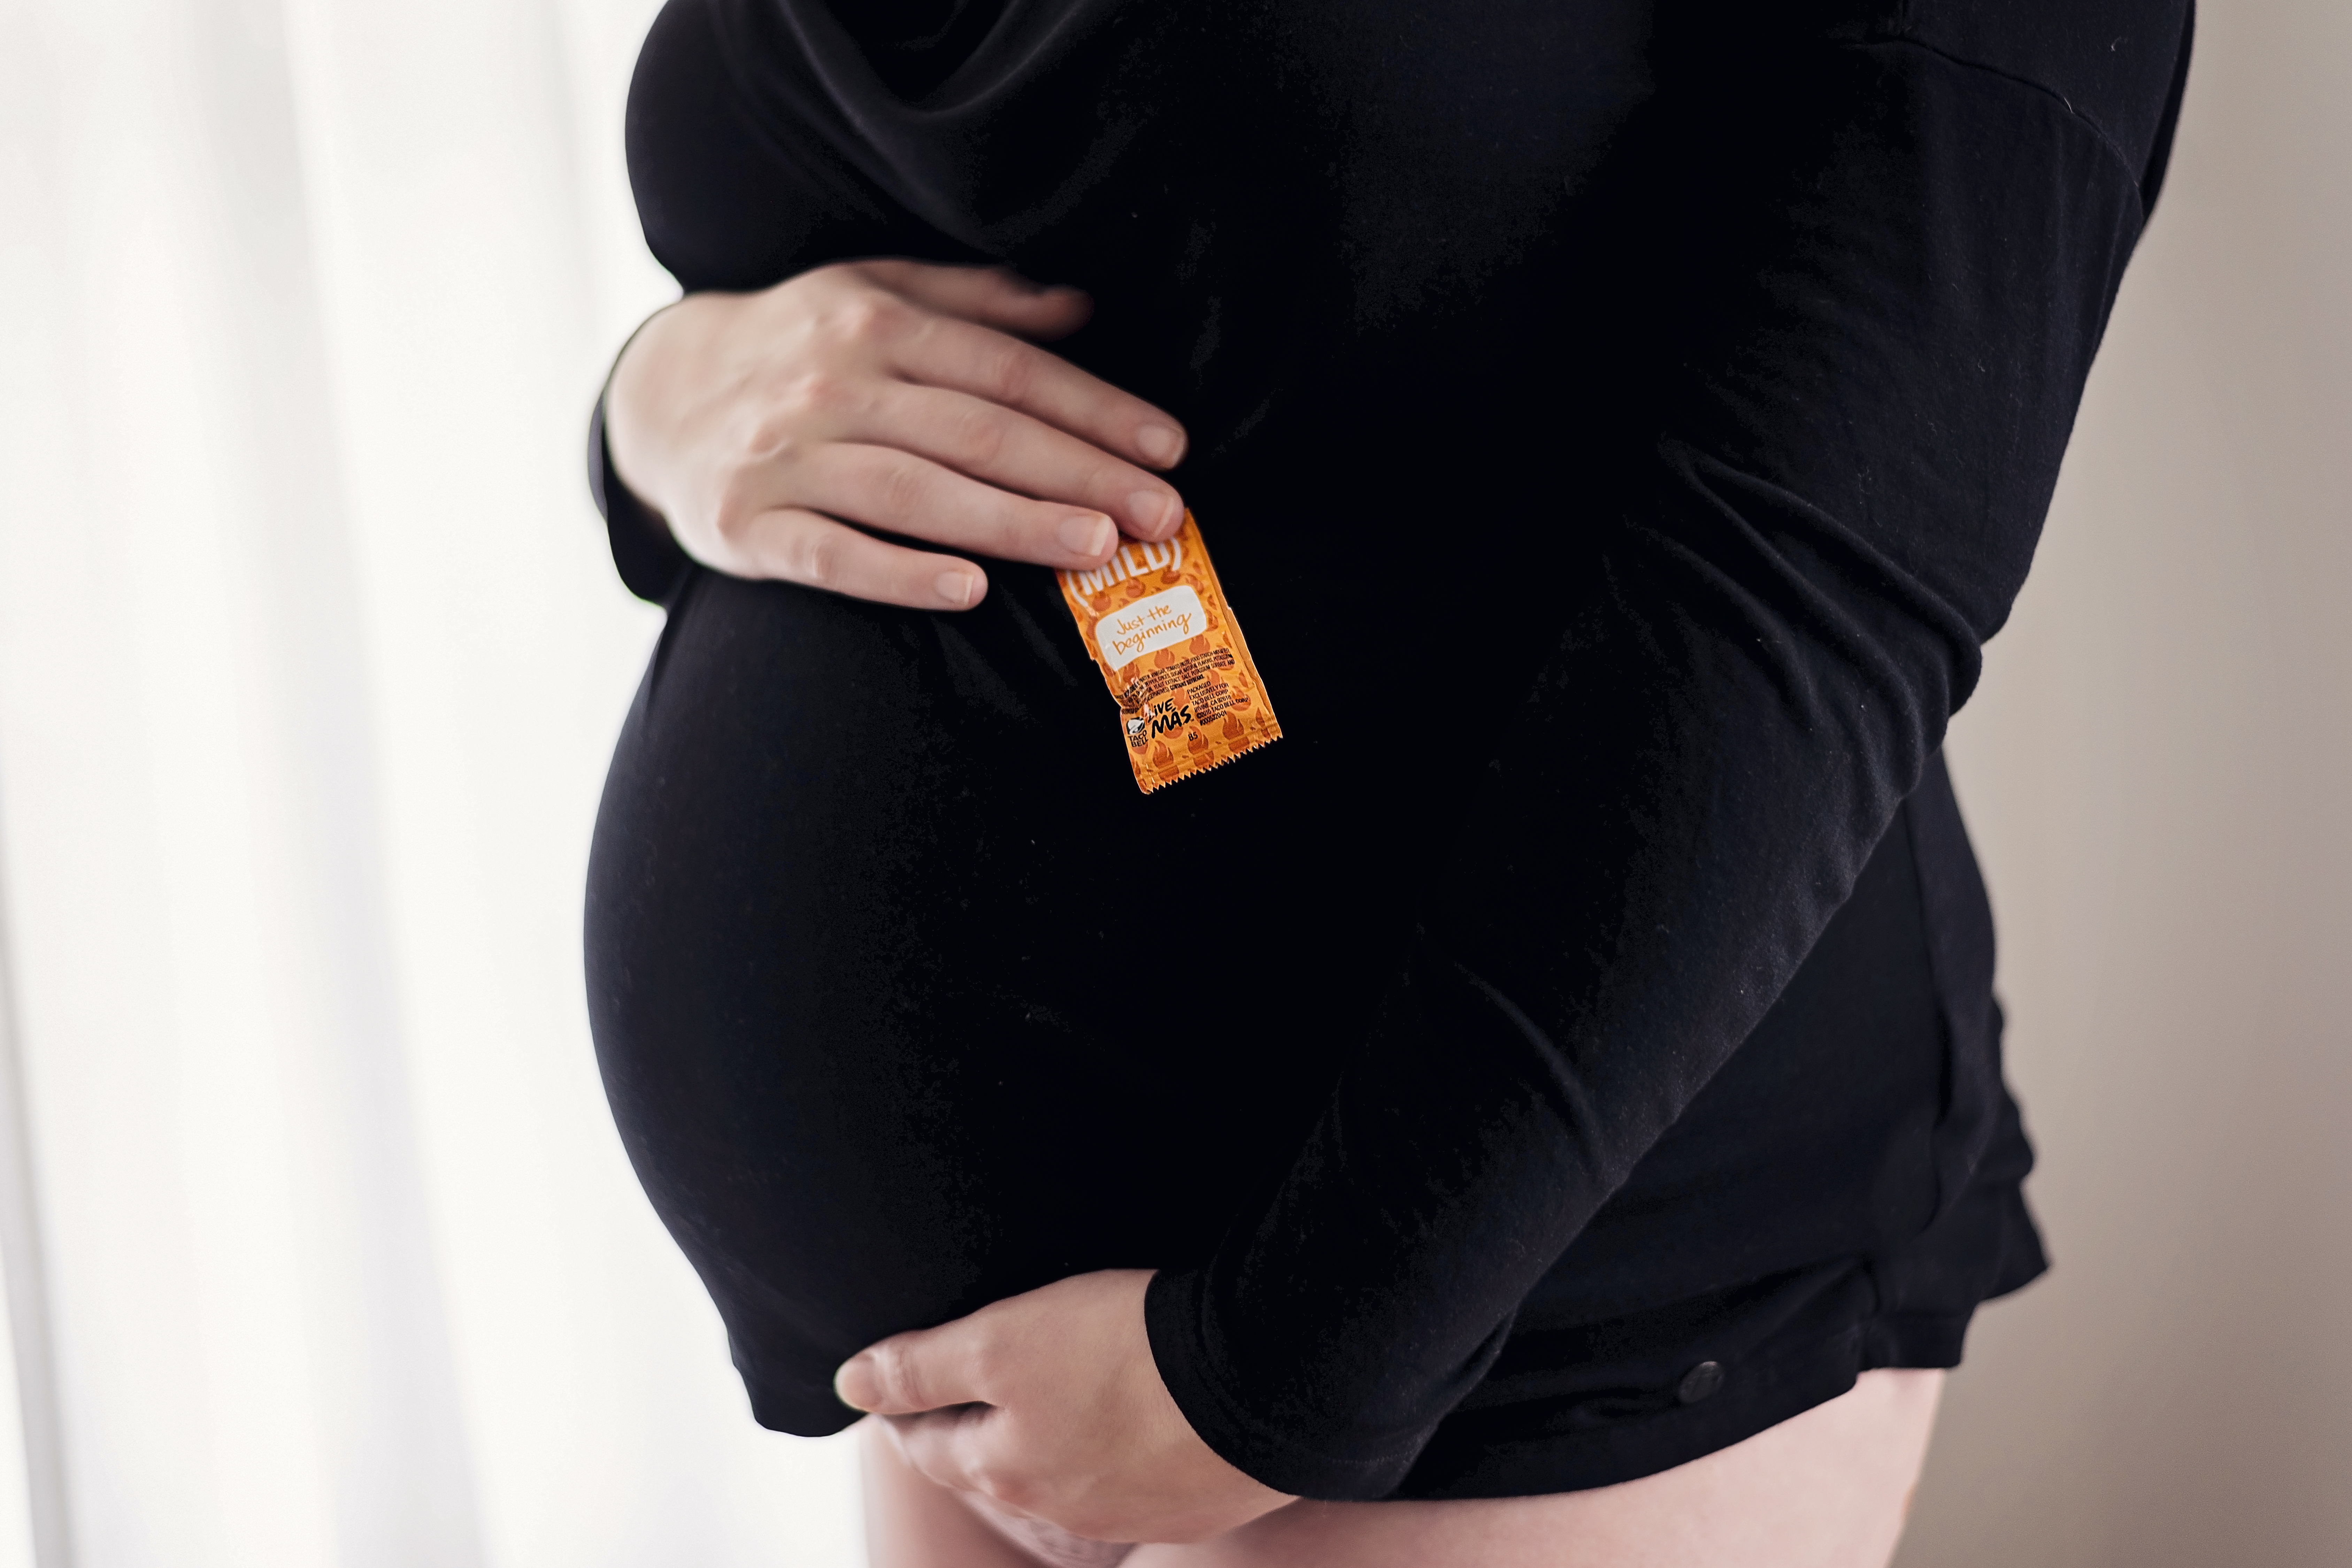 woman holding sauce packet on her baby belly